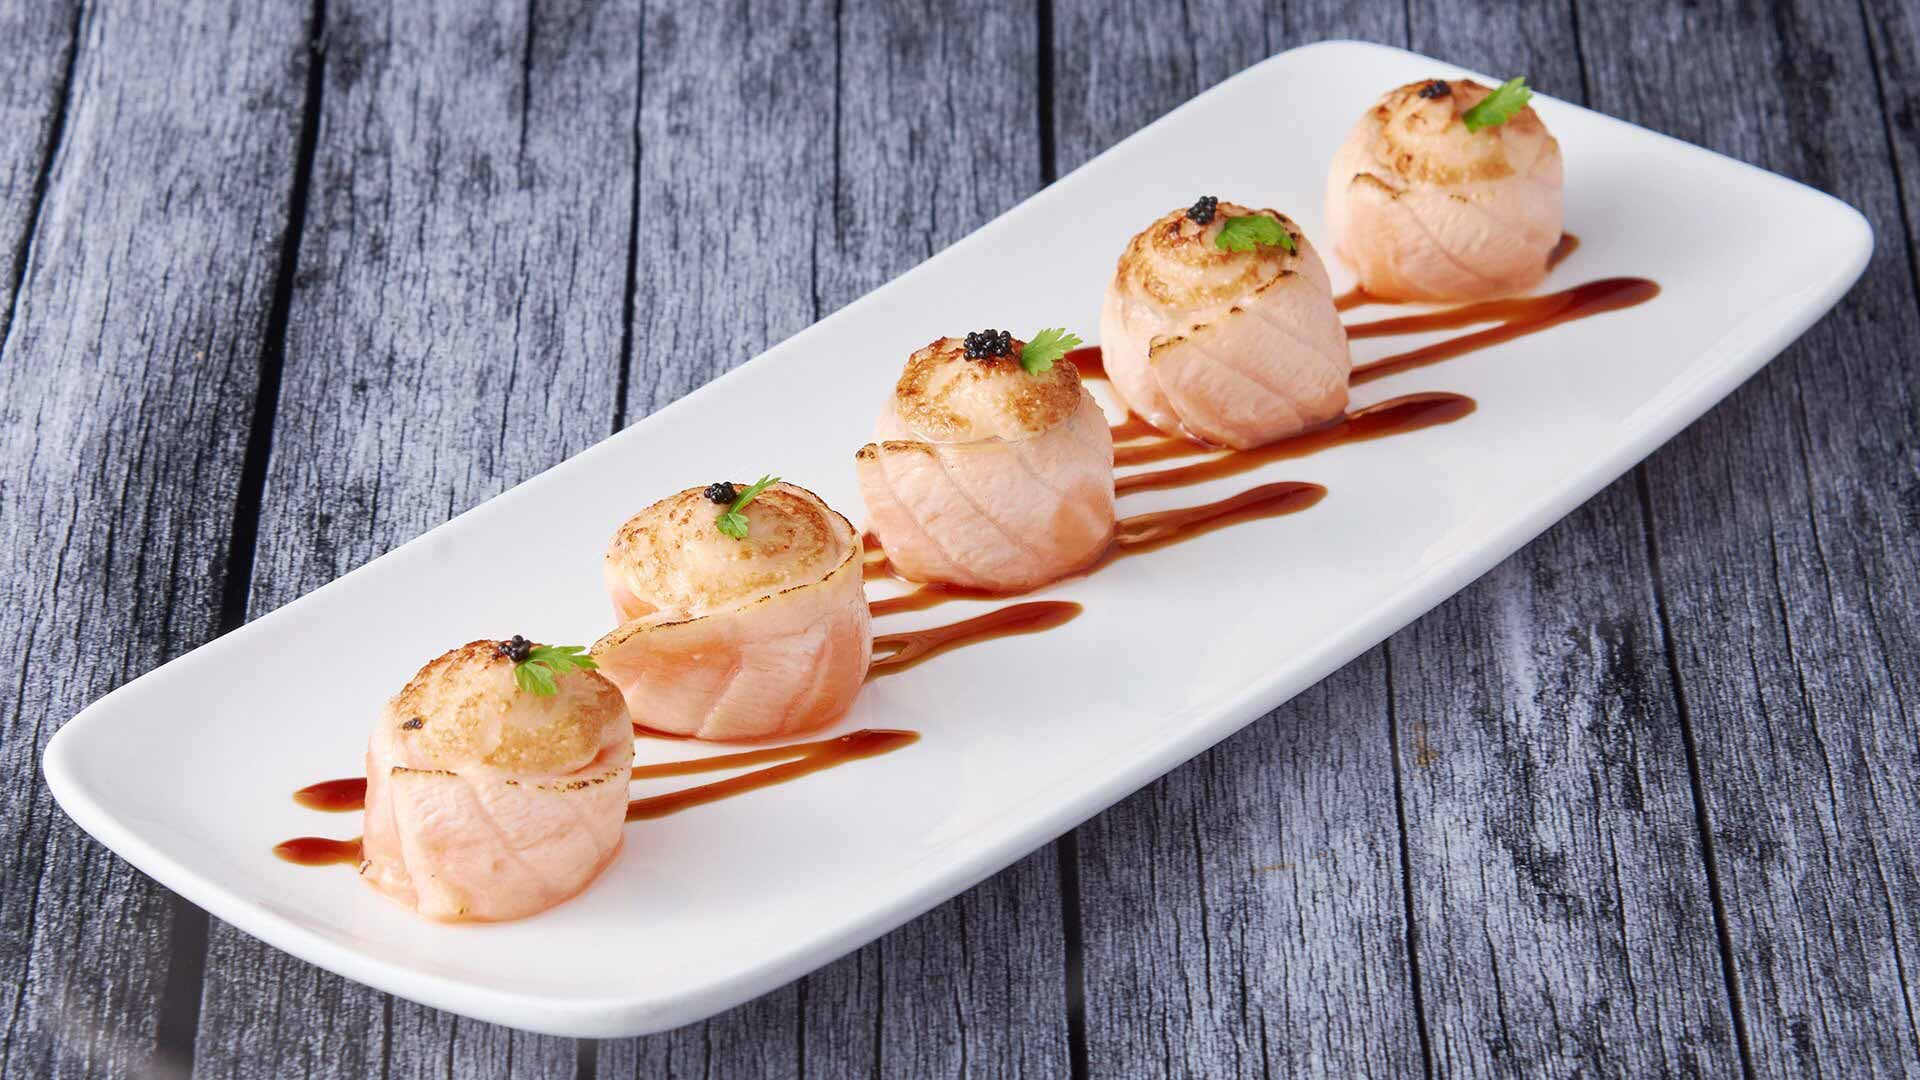 Salmon sushi slightly charred at a Japanese casual dining restaurant in Singapore